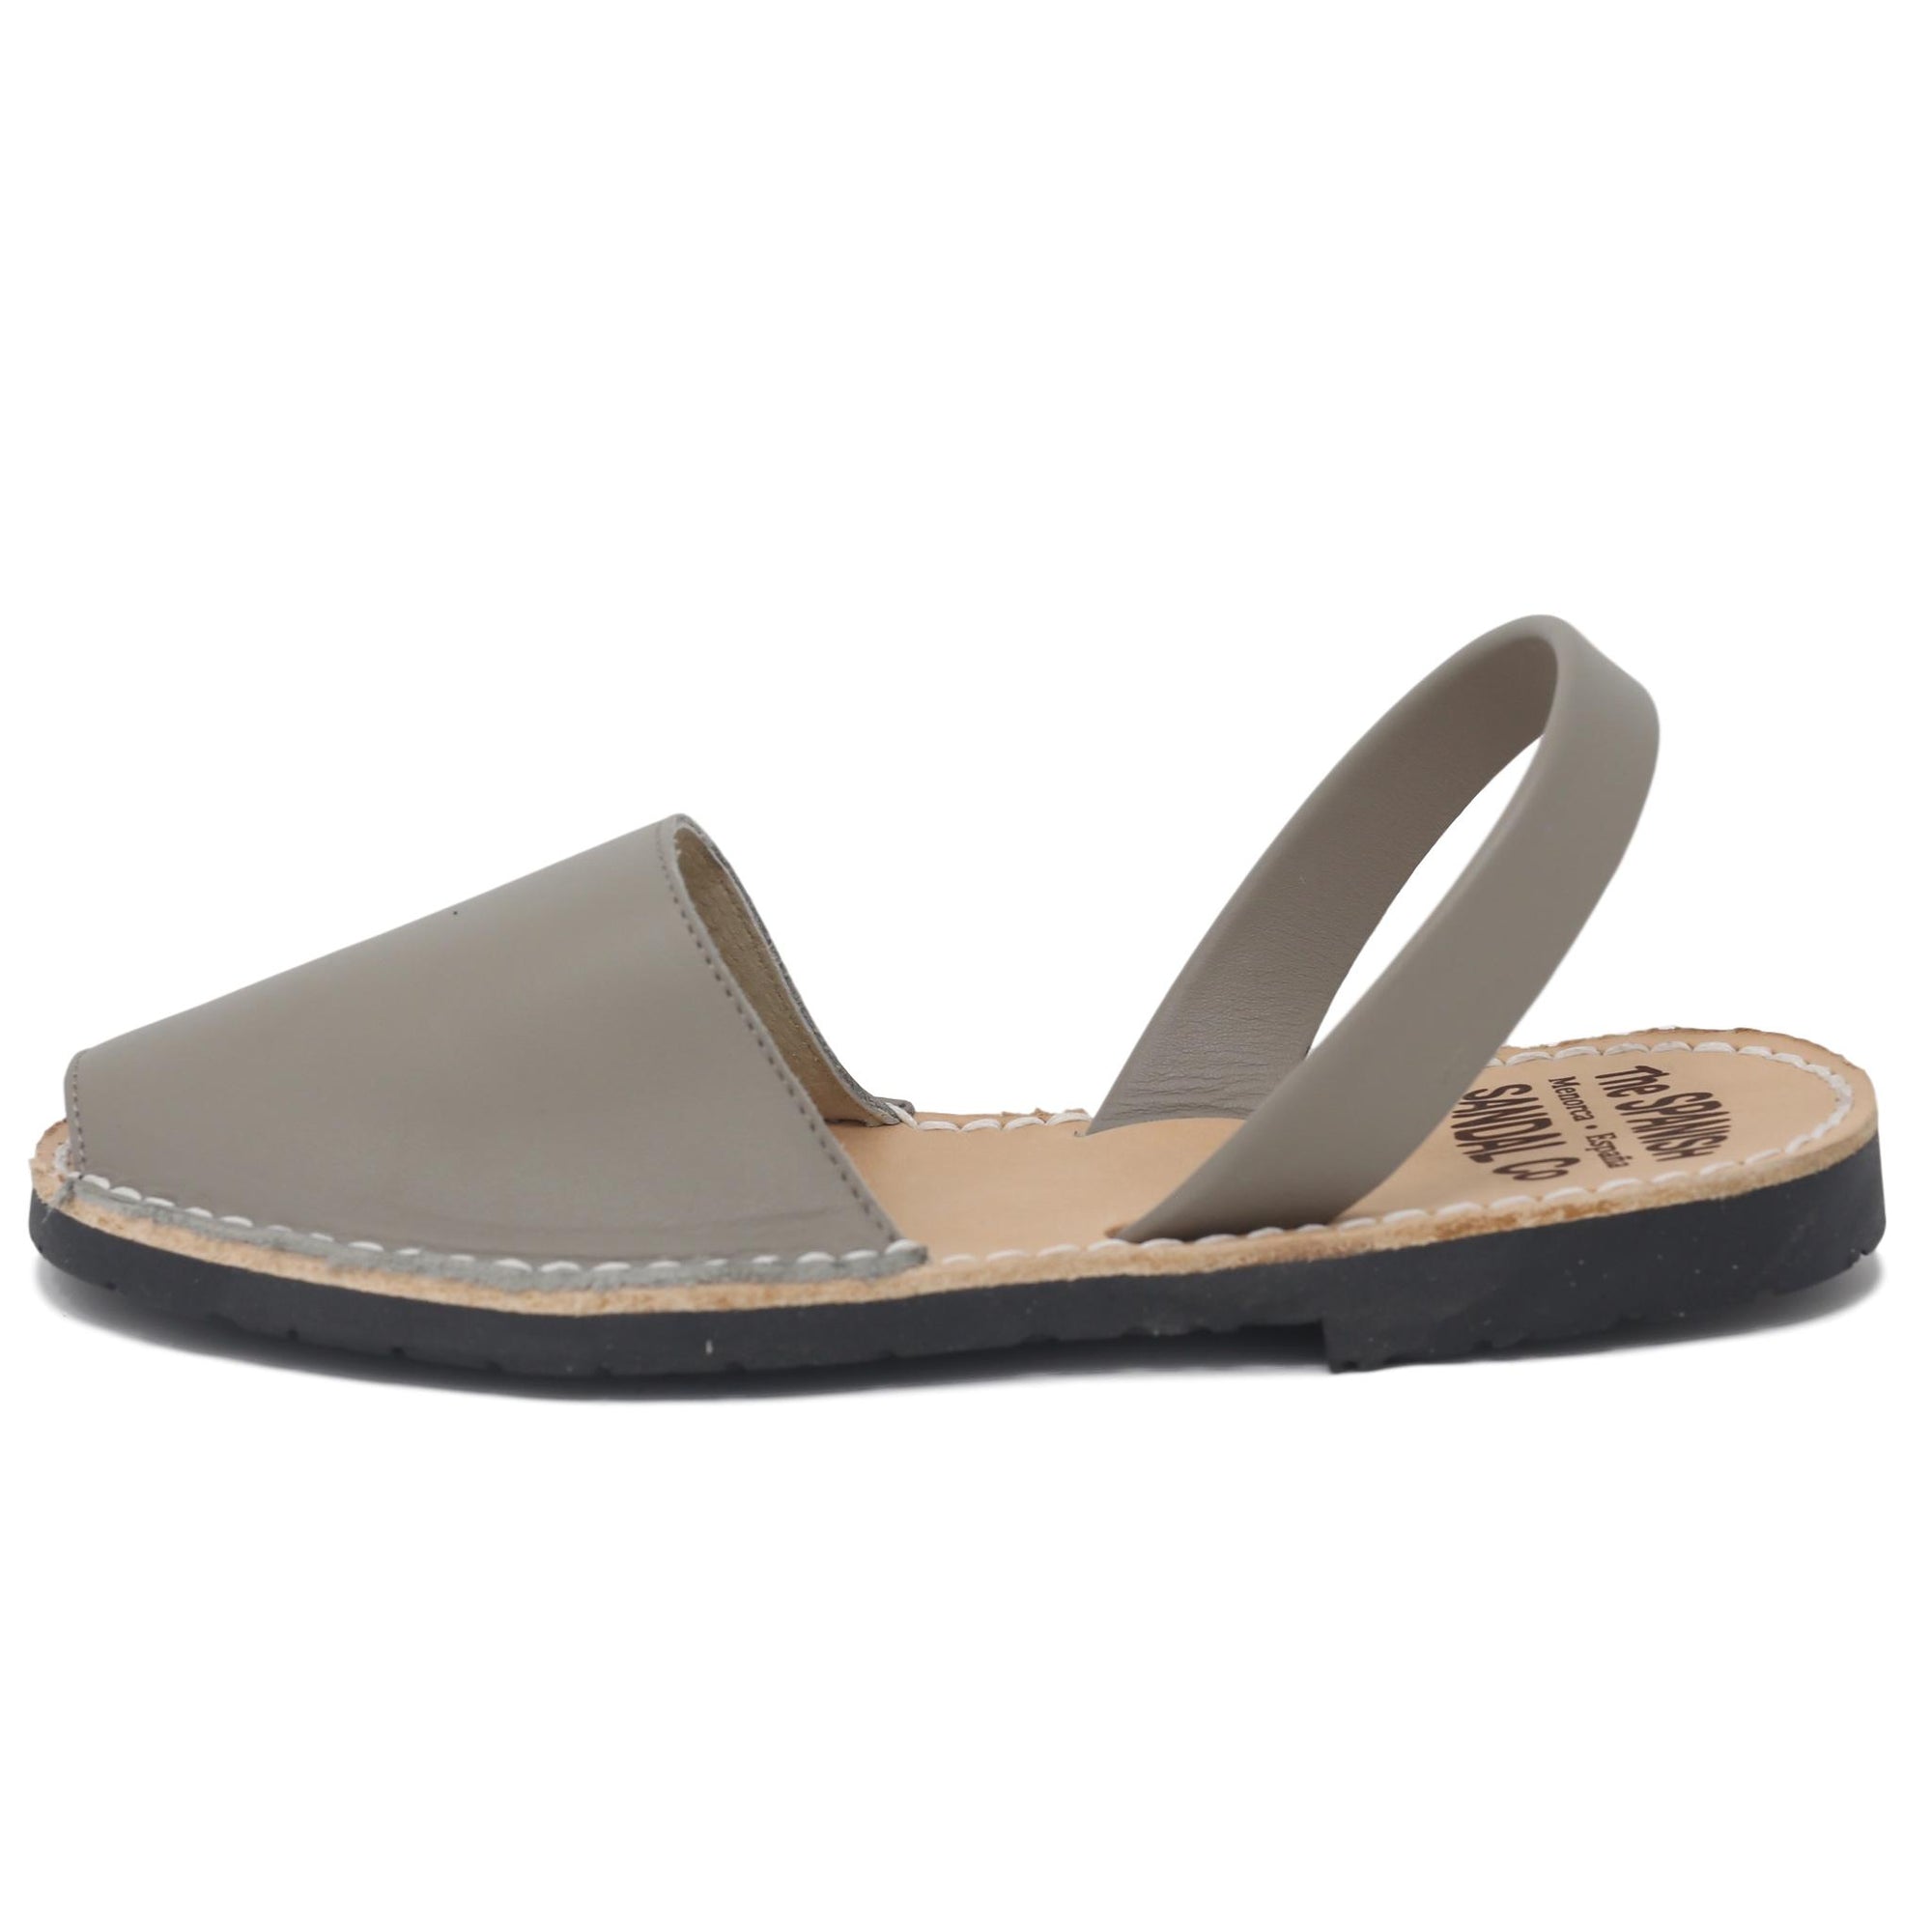 Classic taupe sandals | Beautiful leather sandals made in Spain